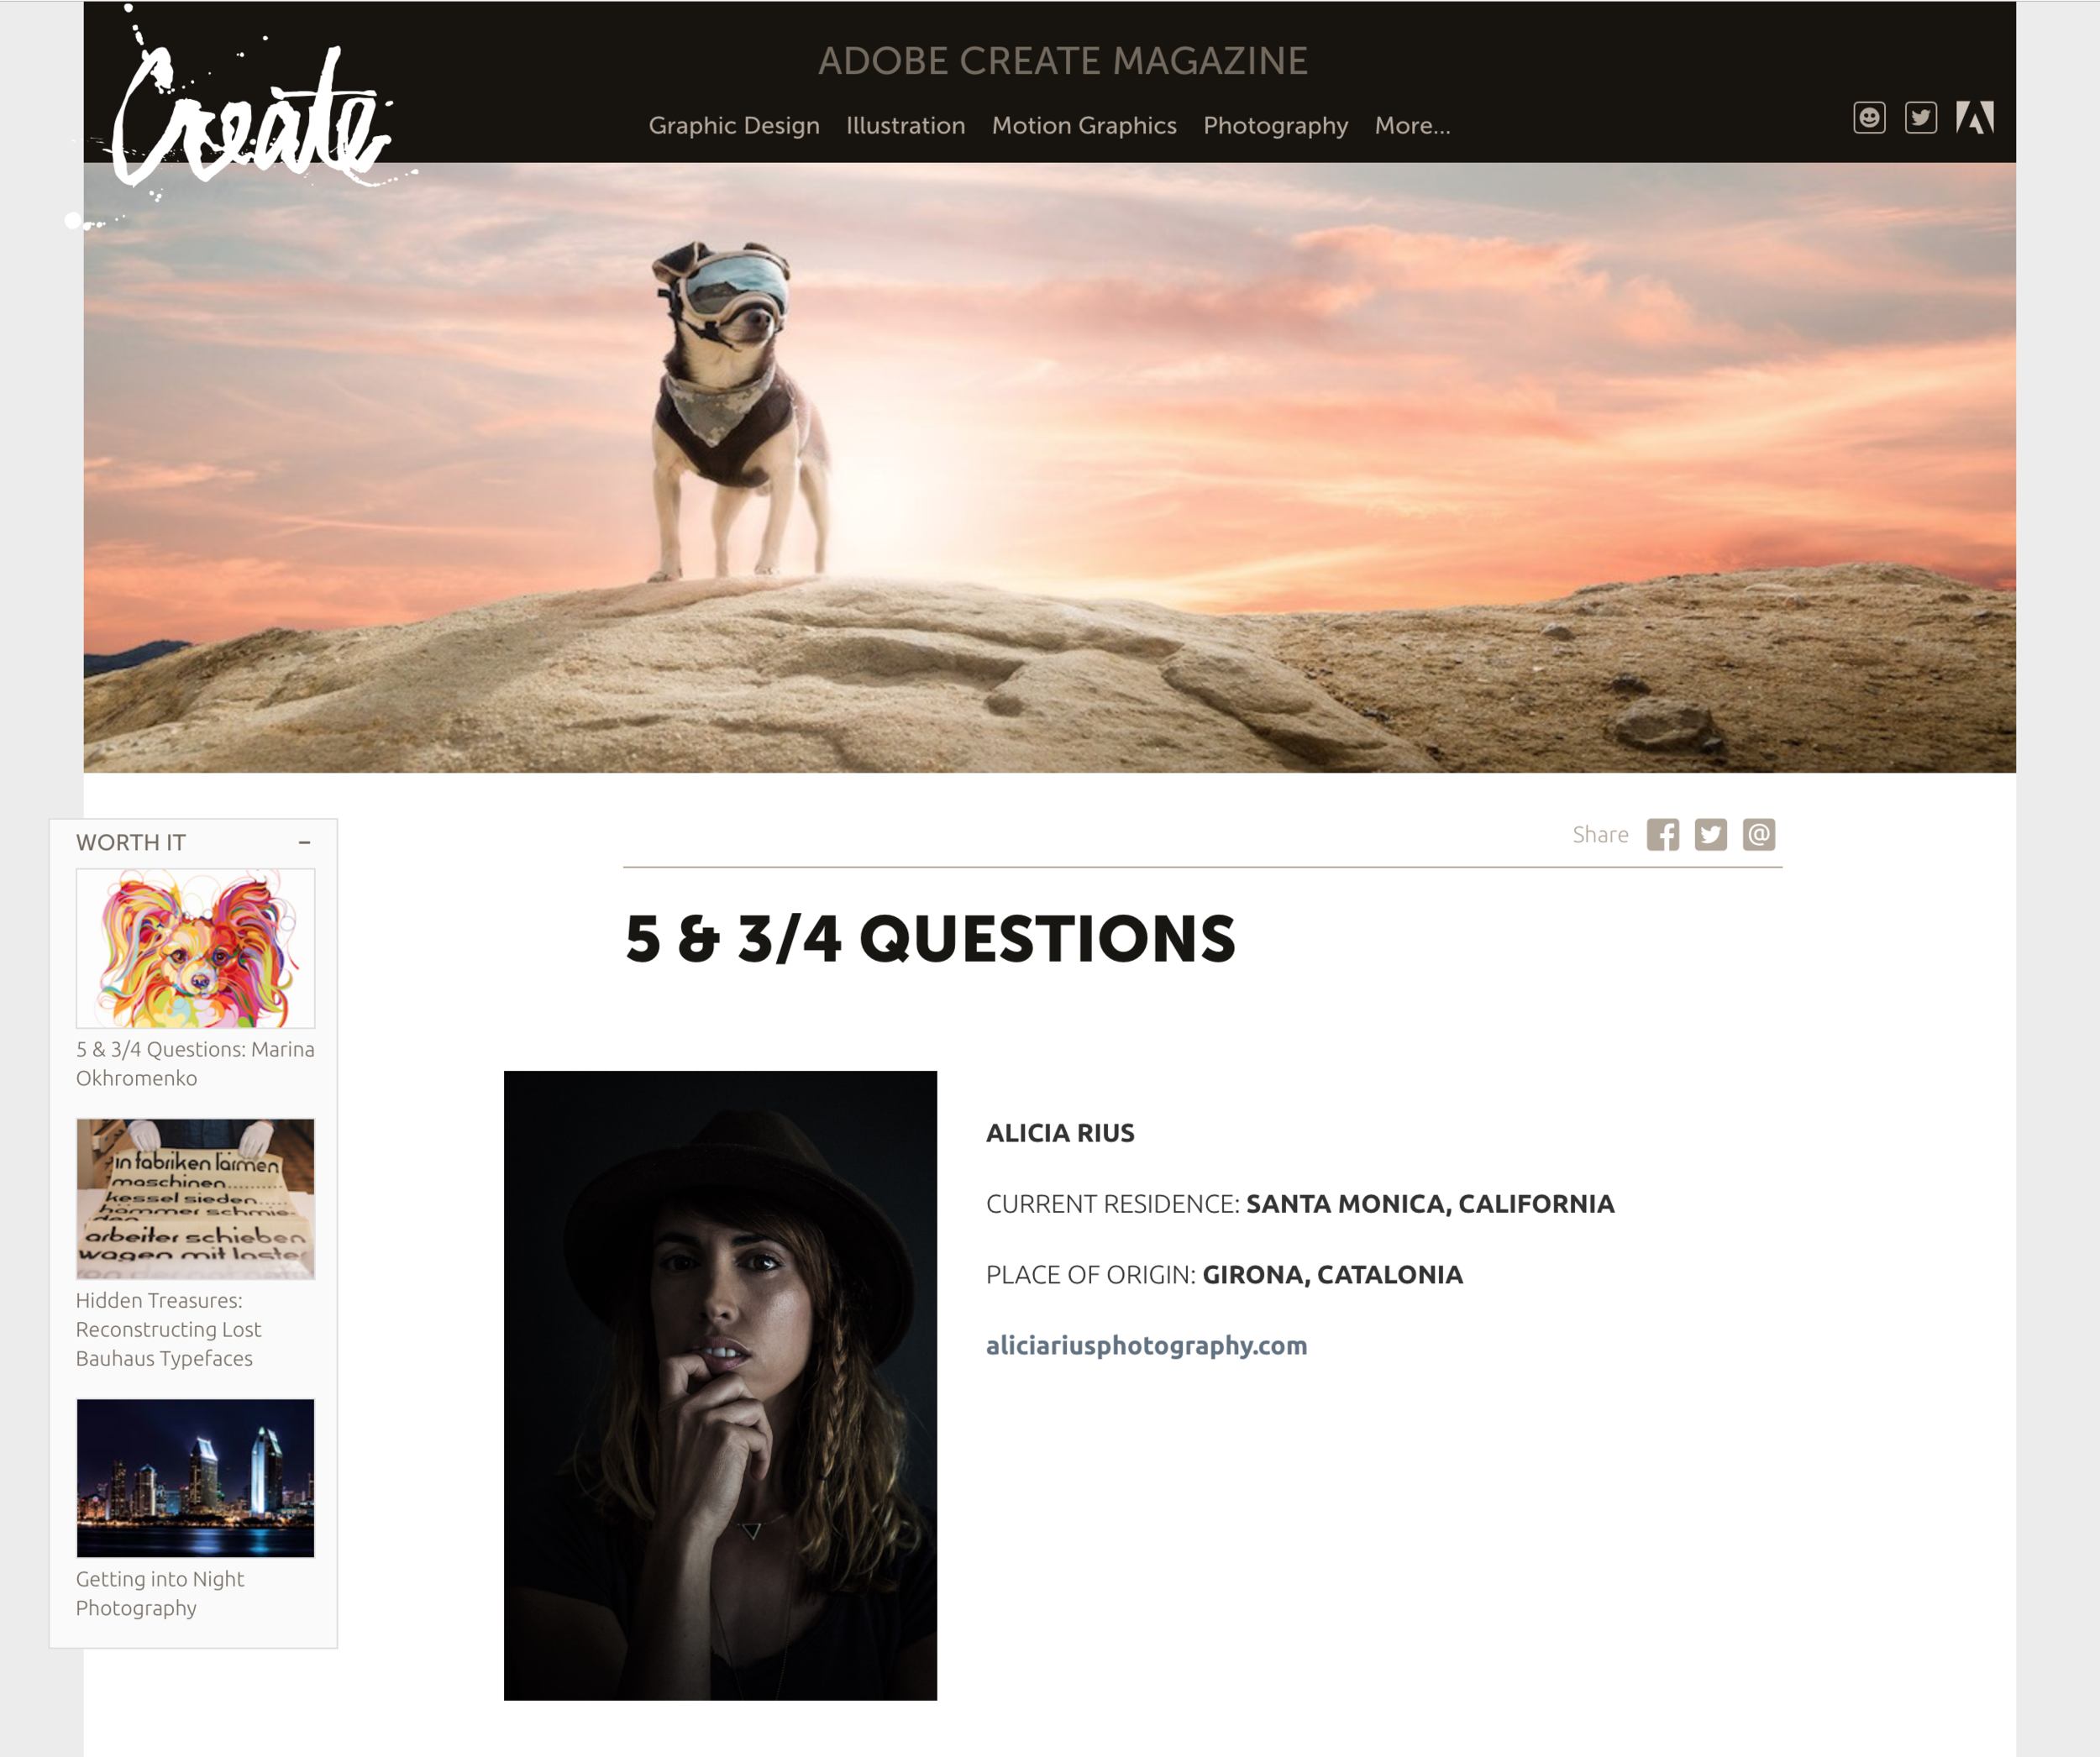 Adobe Create Magazine Interviews Me About My Work — ALICIA RIUS PHOTOGRAPHY  - Dog & Cat Photography - Commercial & Editorial